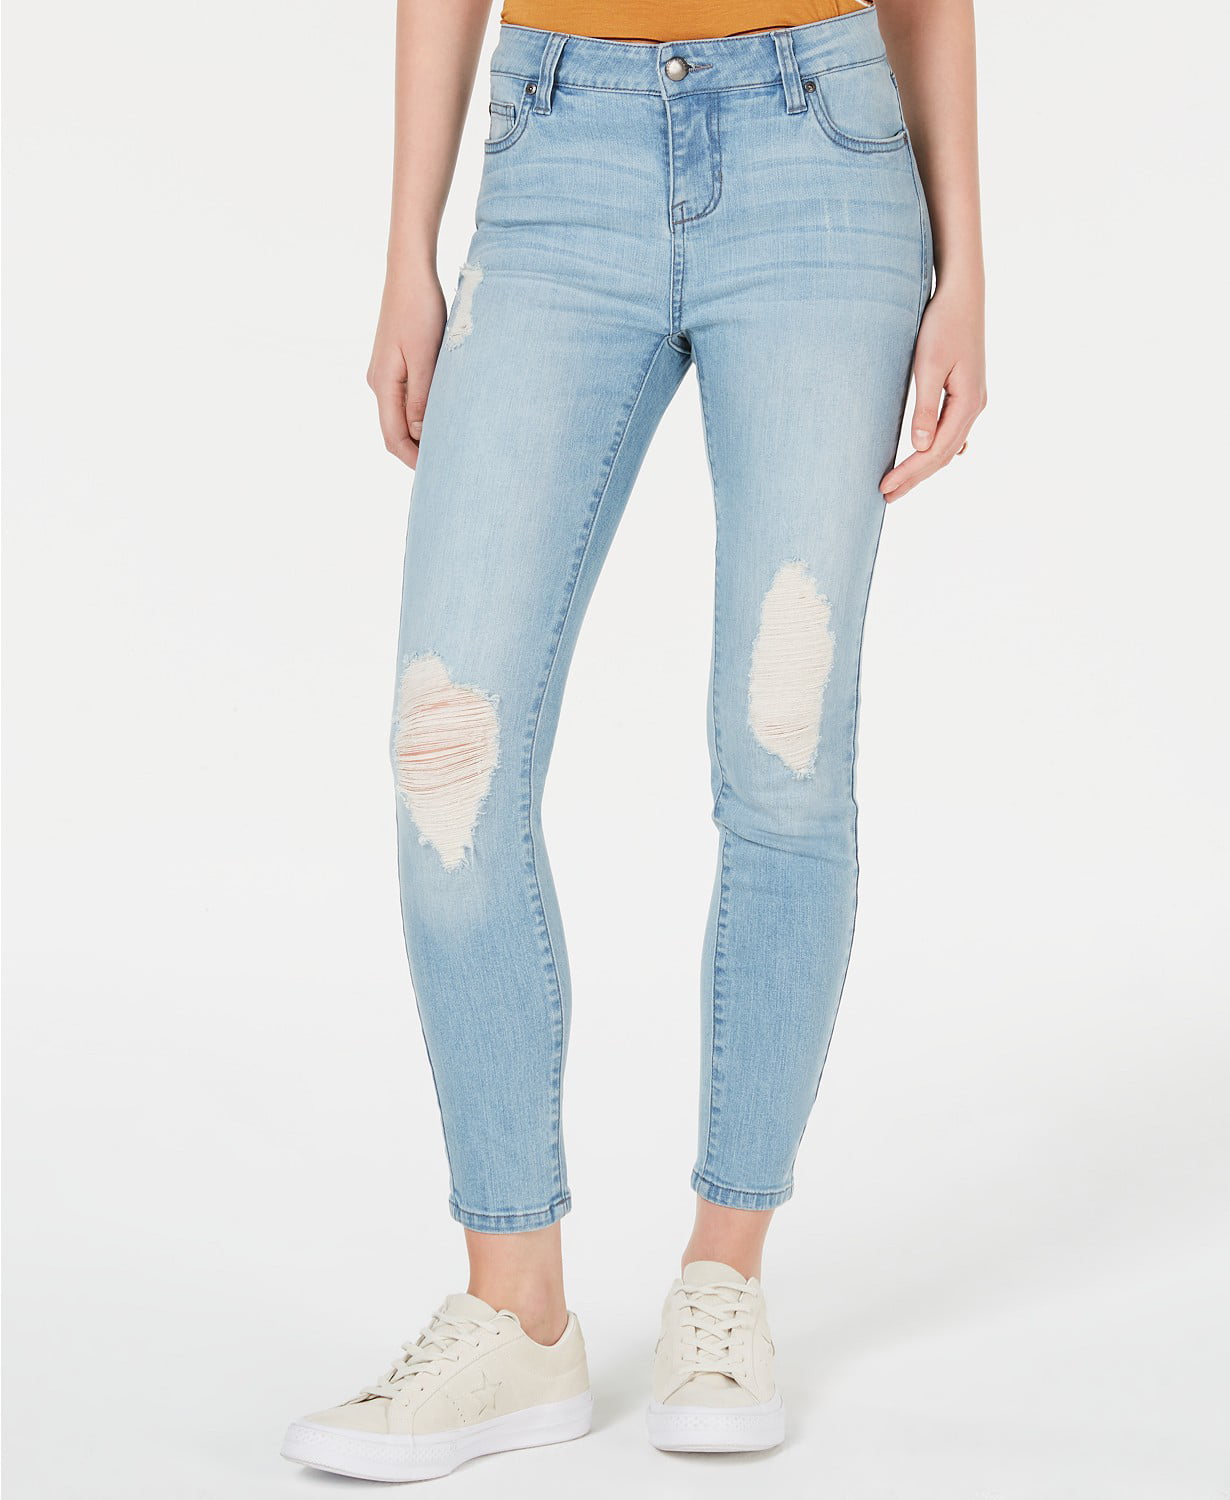 Celebrity Pink - Ripped Skinny Ankle Jeans - Juniors - 9 - Walmart.com